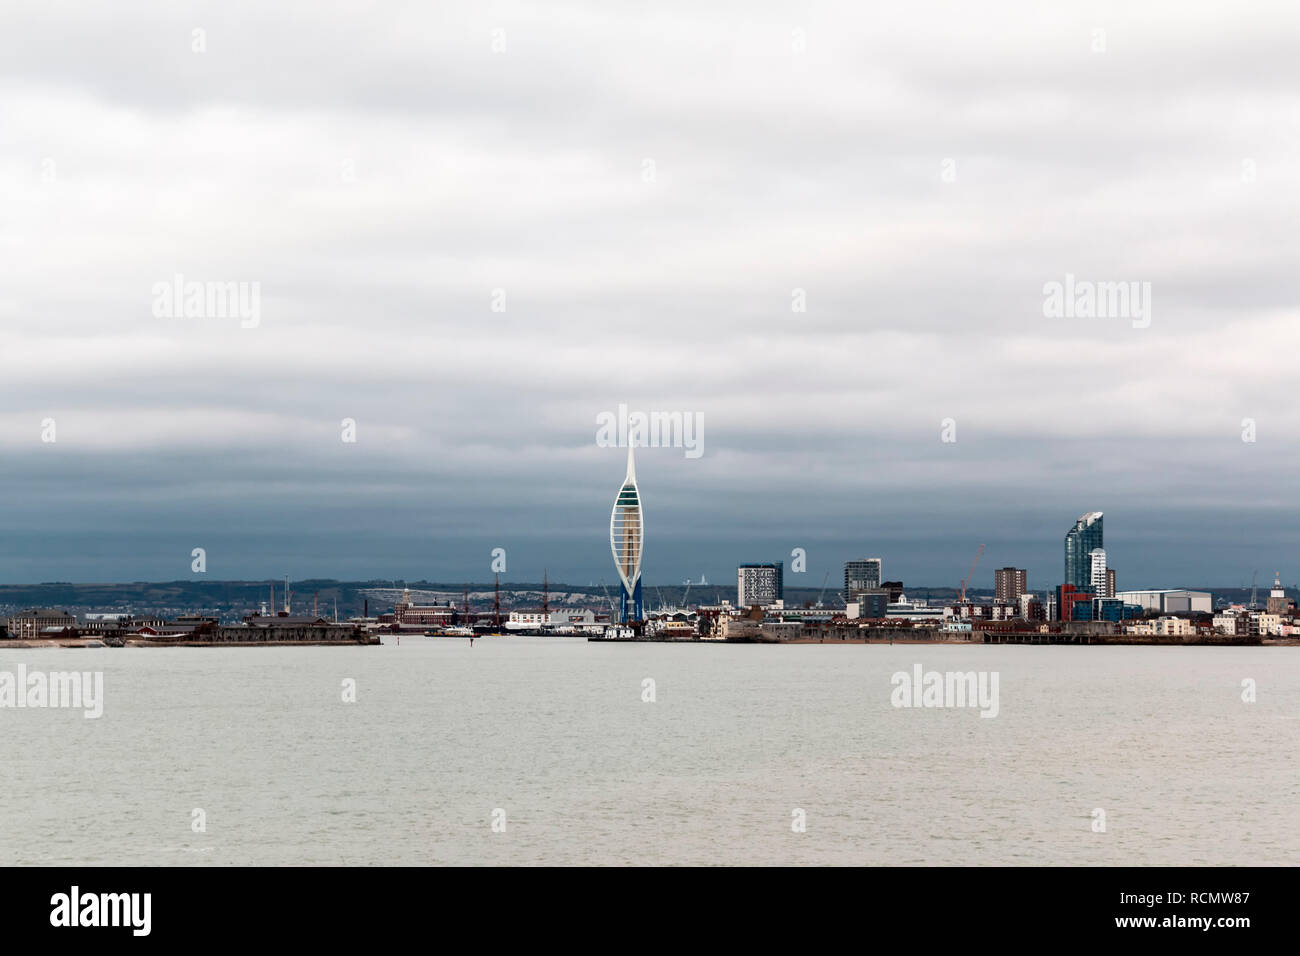 View looking towards Portsmouth from the Solent, showing the spinnaker tower. Stock Photo